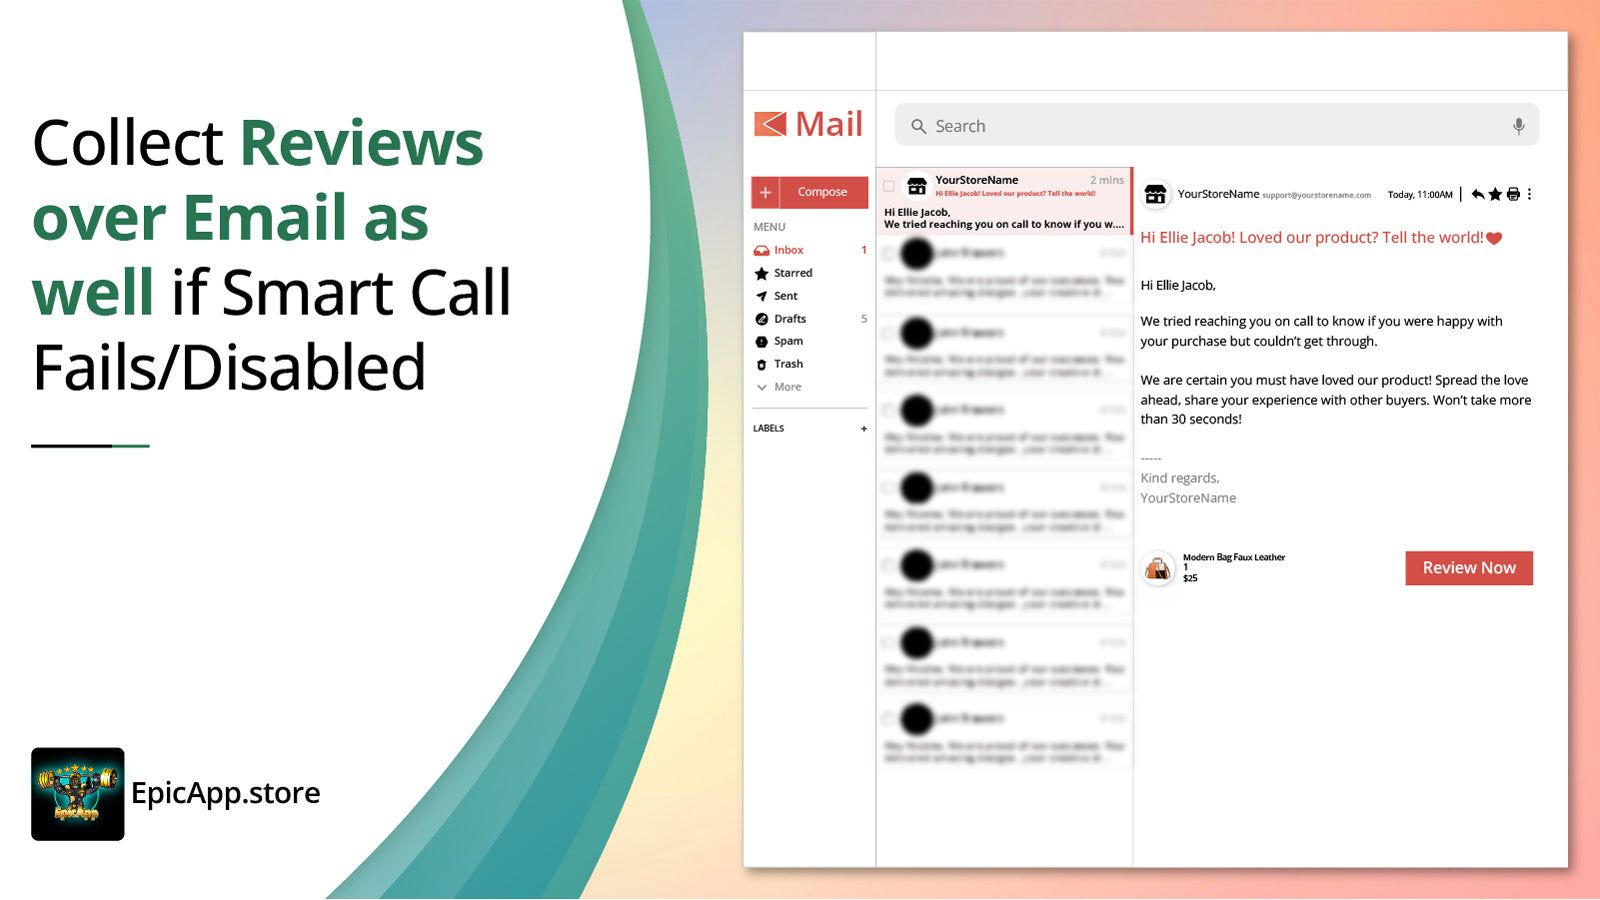 Collect Reviews over Email as well if Smart Call Fails